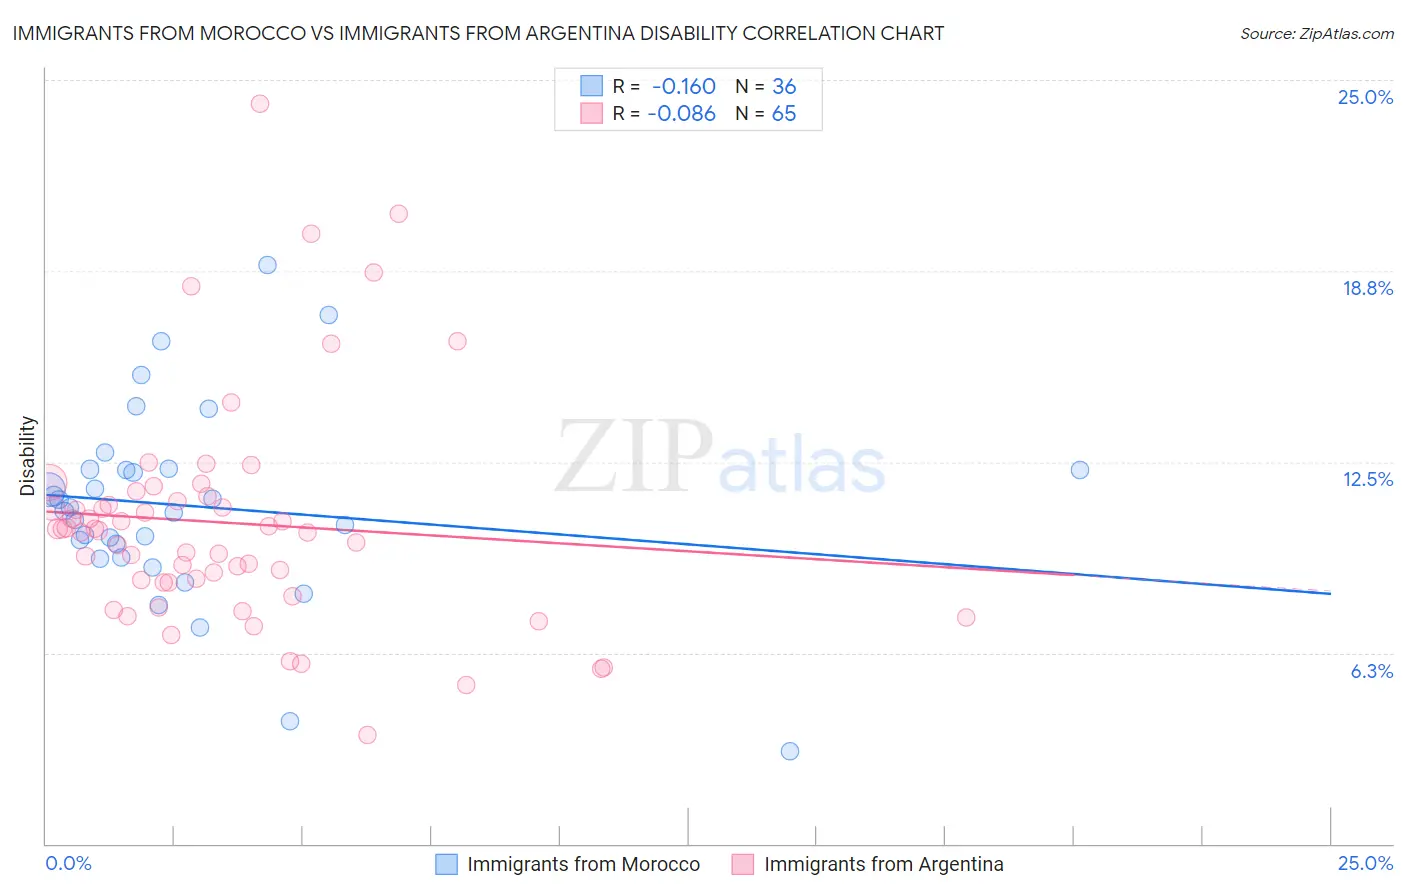 Immigrants from Morocco vs Immigrants from Argentina Disability